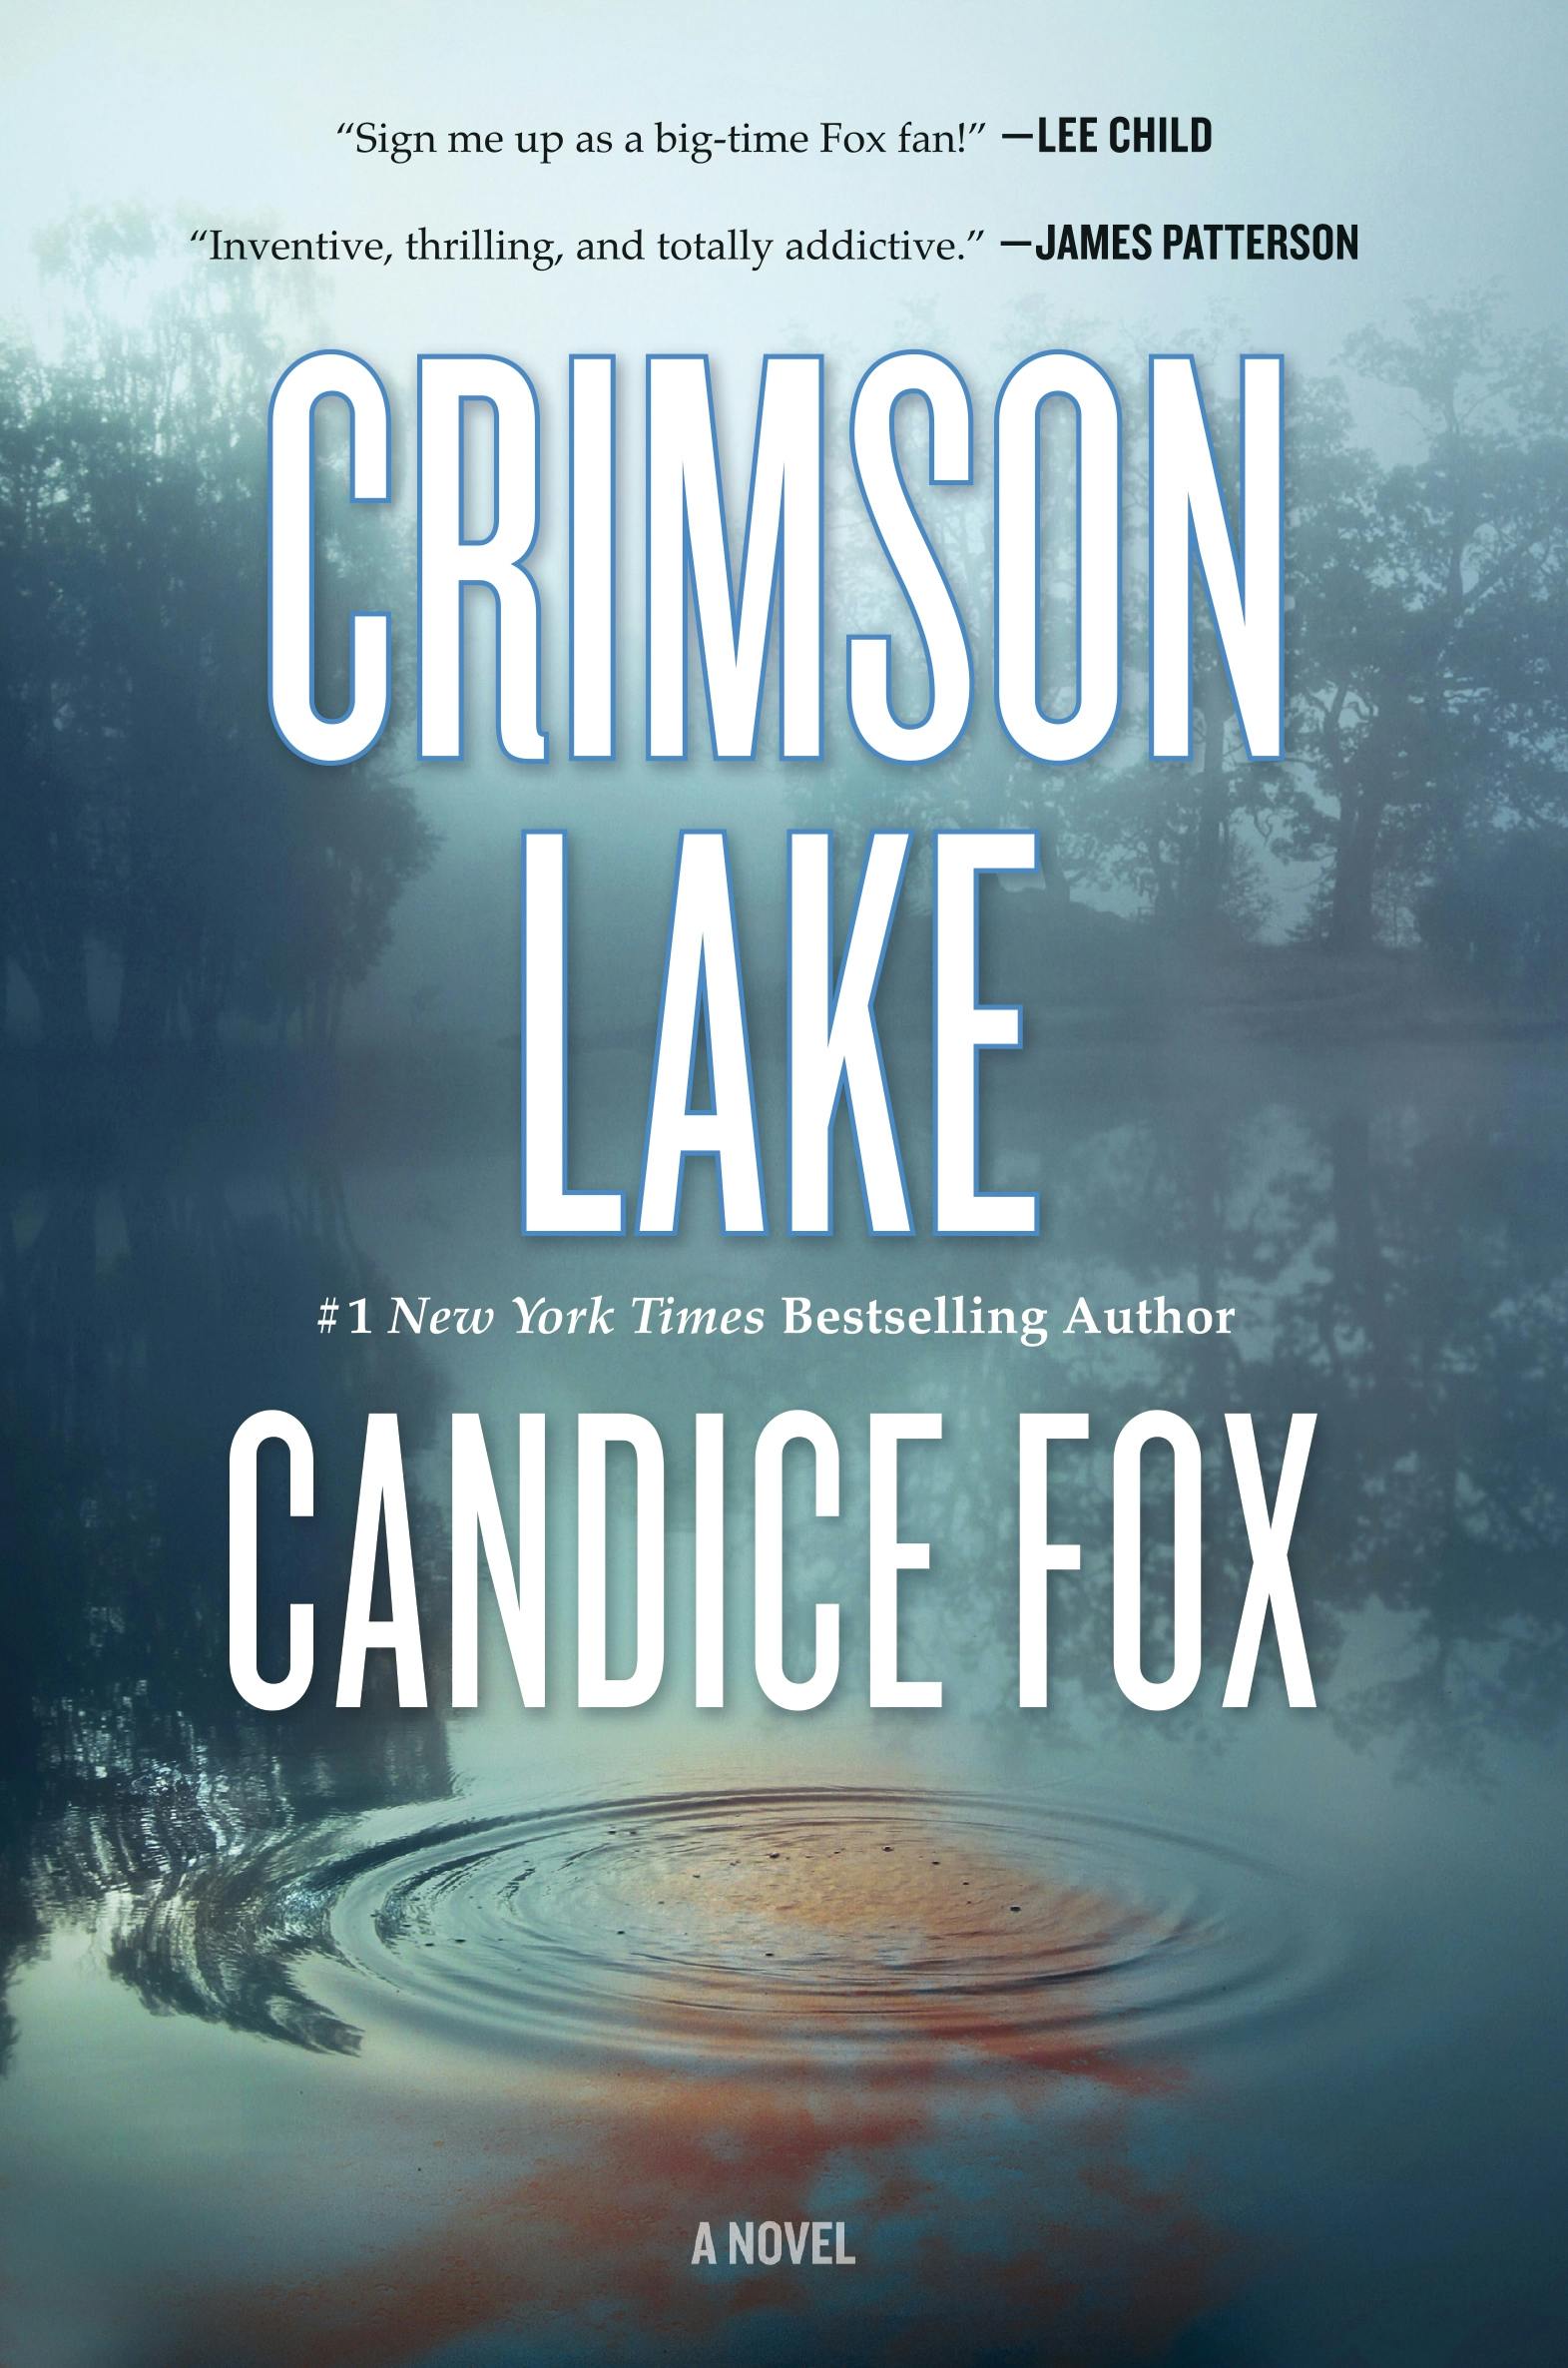 Cover for the book titled as: Crimson Lake